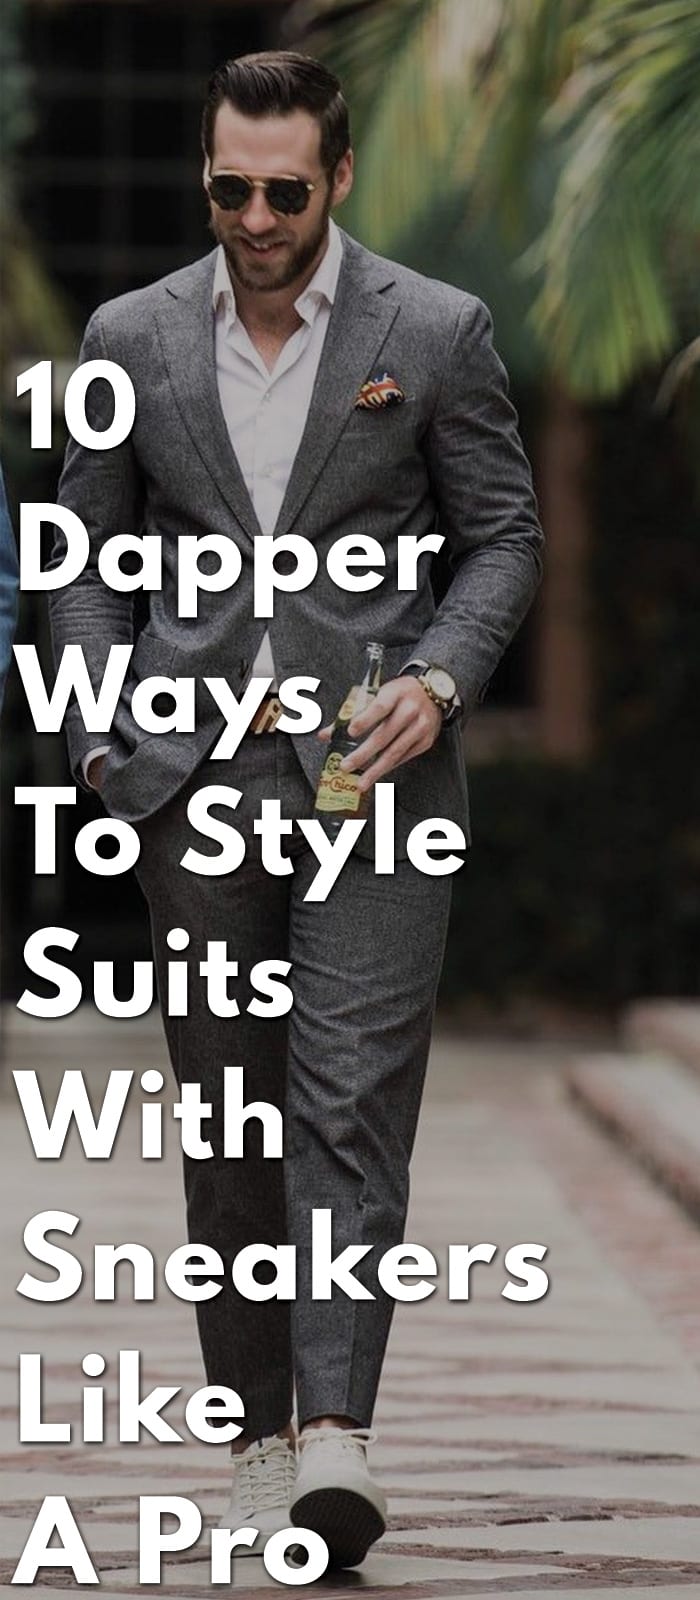 10-Dapper-Ways-To-Style-Suits-With-Sneakers-Like-A-Pro